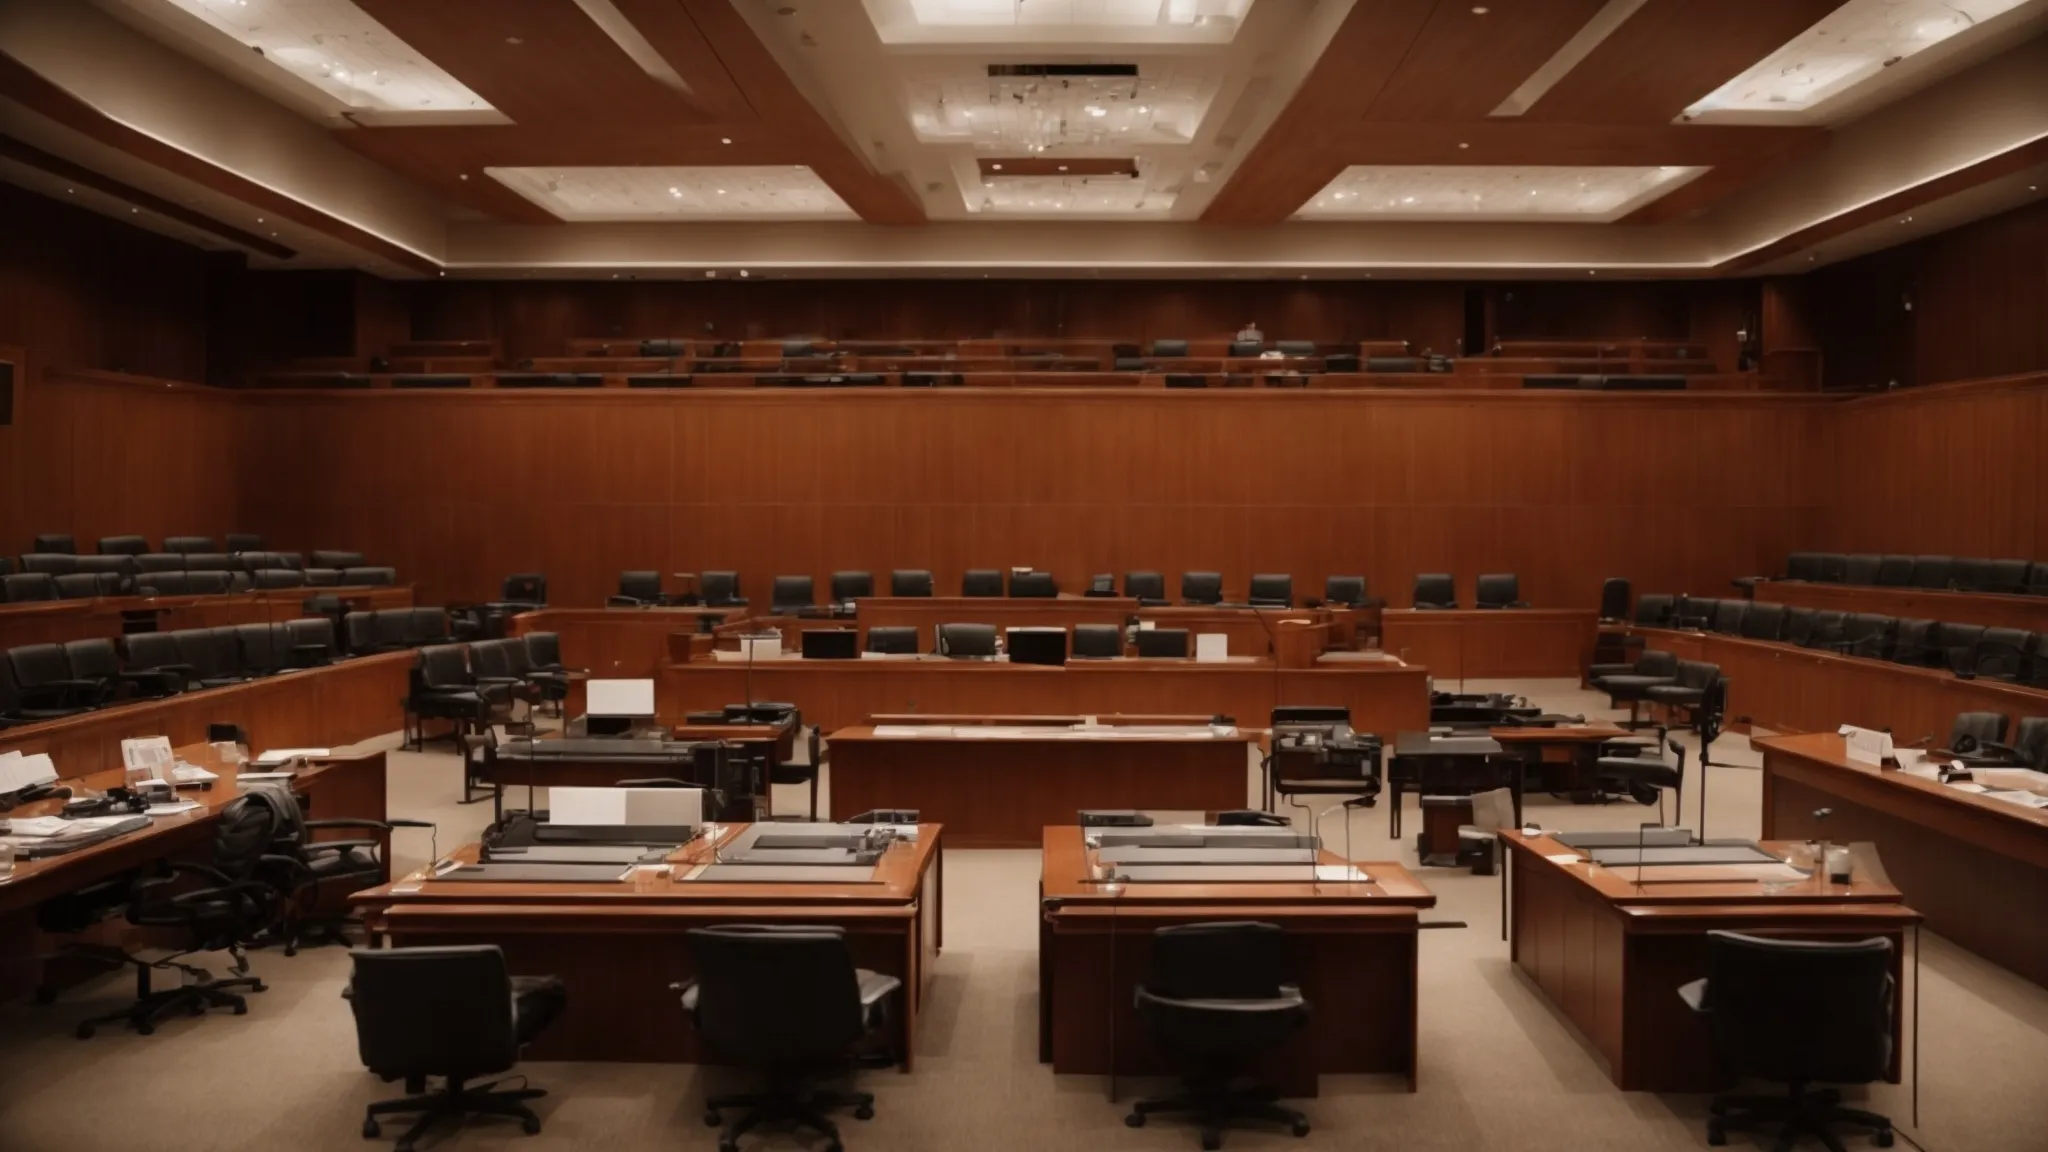 an expansive courtroom with a large table where multiple microphones and documents are laid out, indicating preparation for an international arbitration hearing.